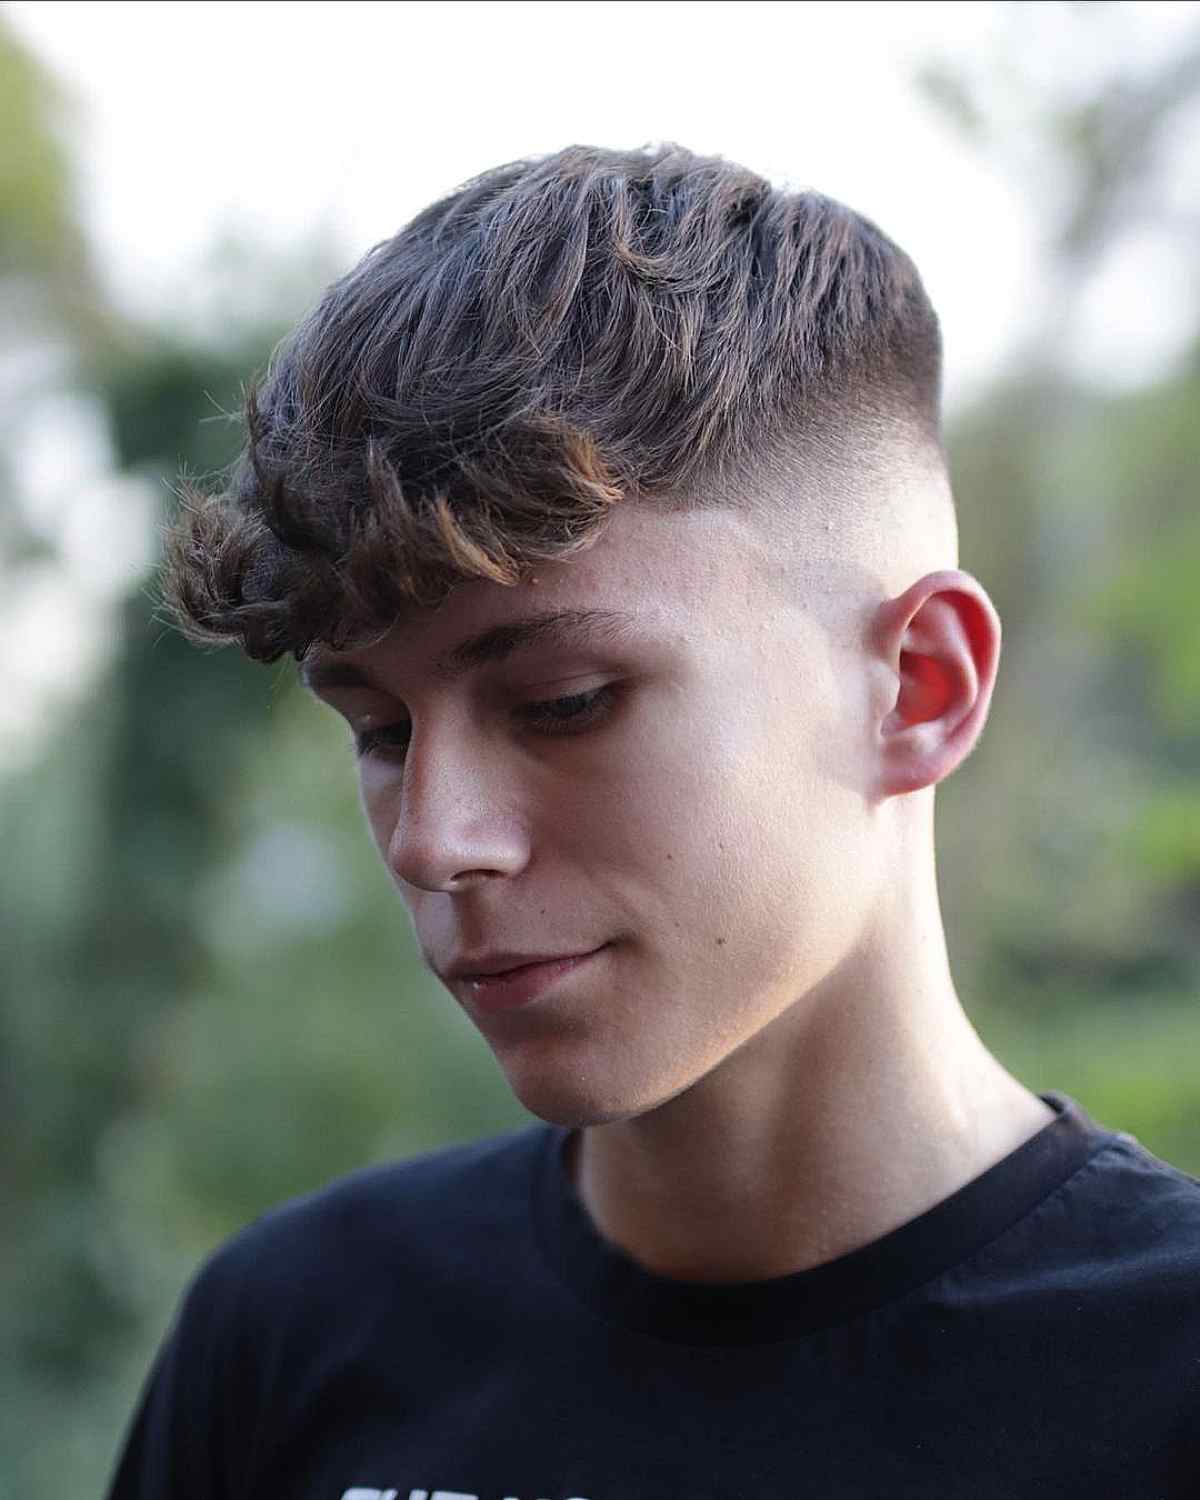 Bald Fade with Thick Waves on Top for Teens